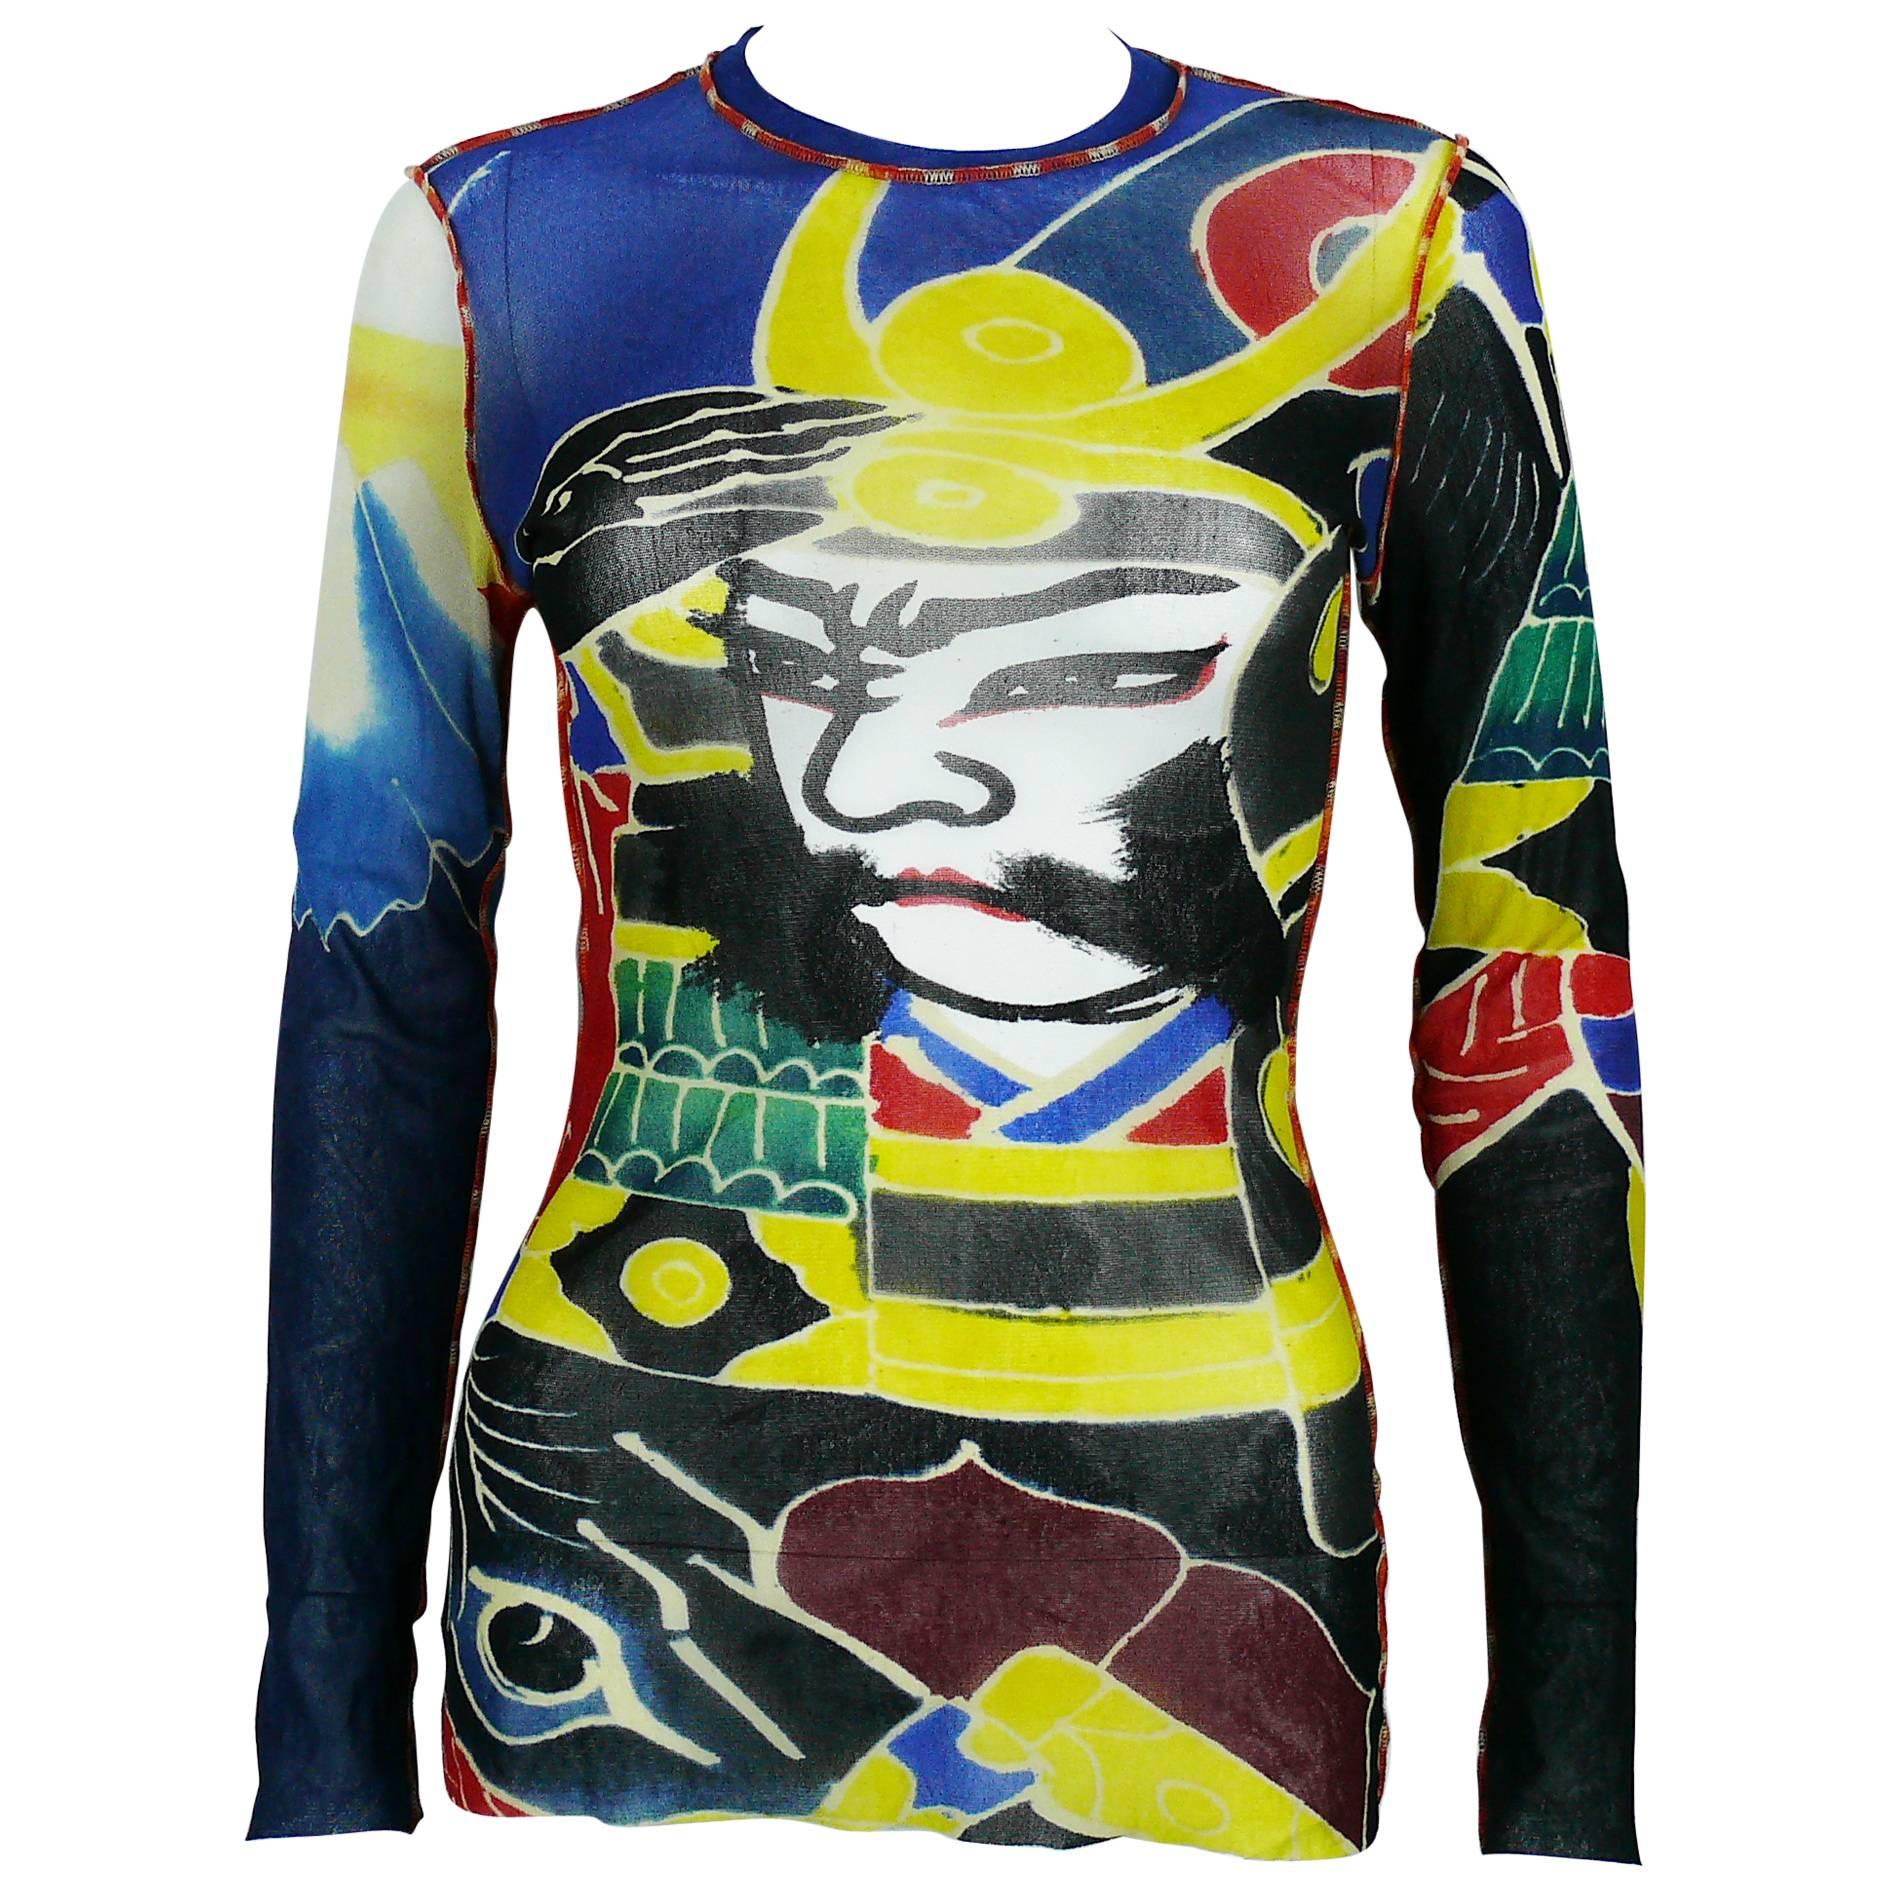 Jean Paul Gaultier Maille Vintage Japanese Tattoo Print Mesh Unisex Top Size M